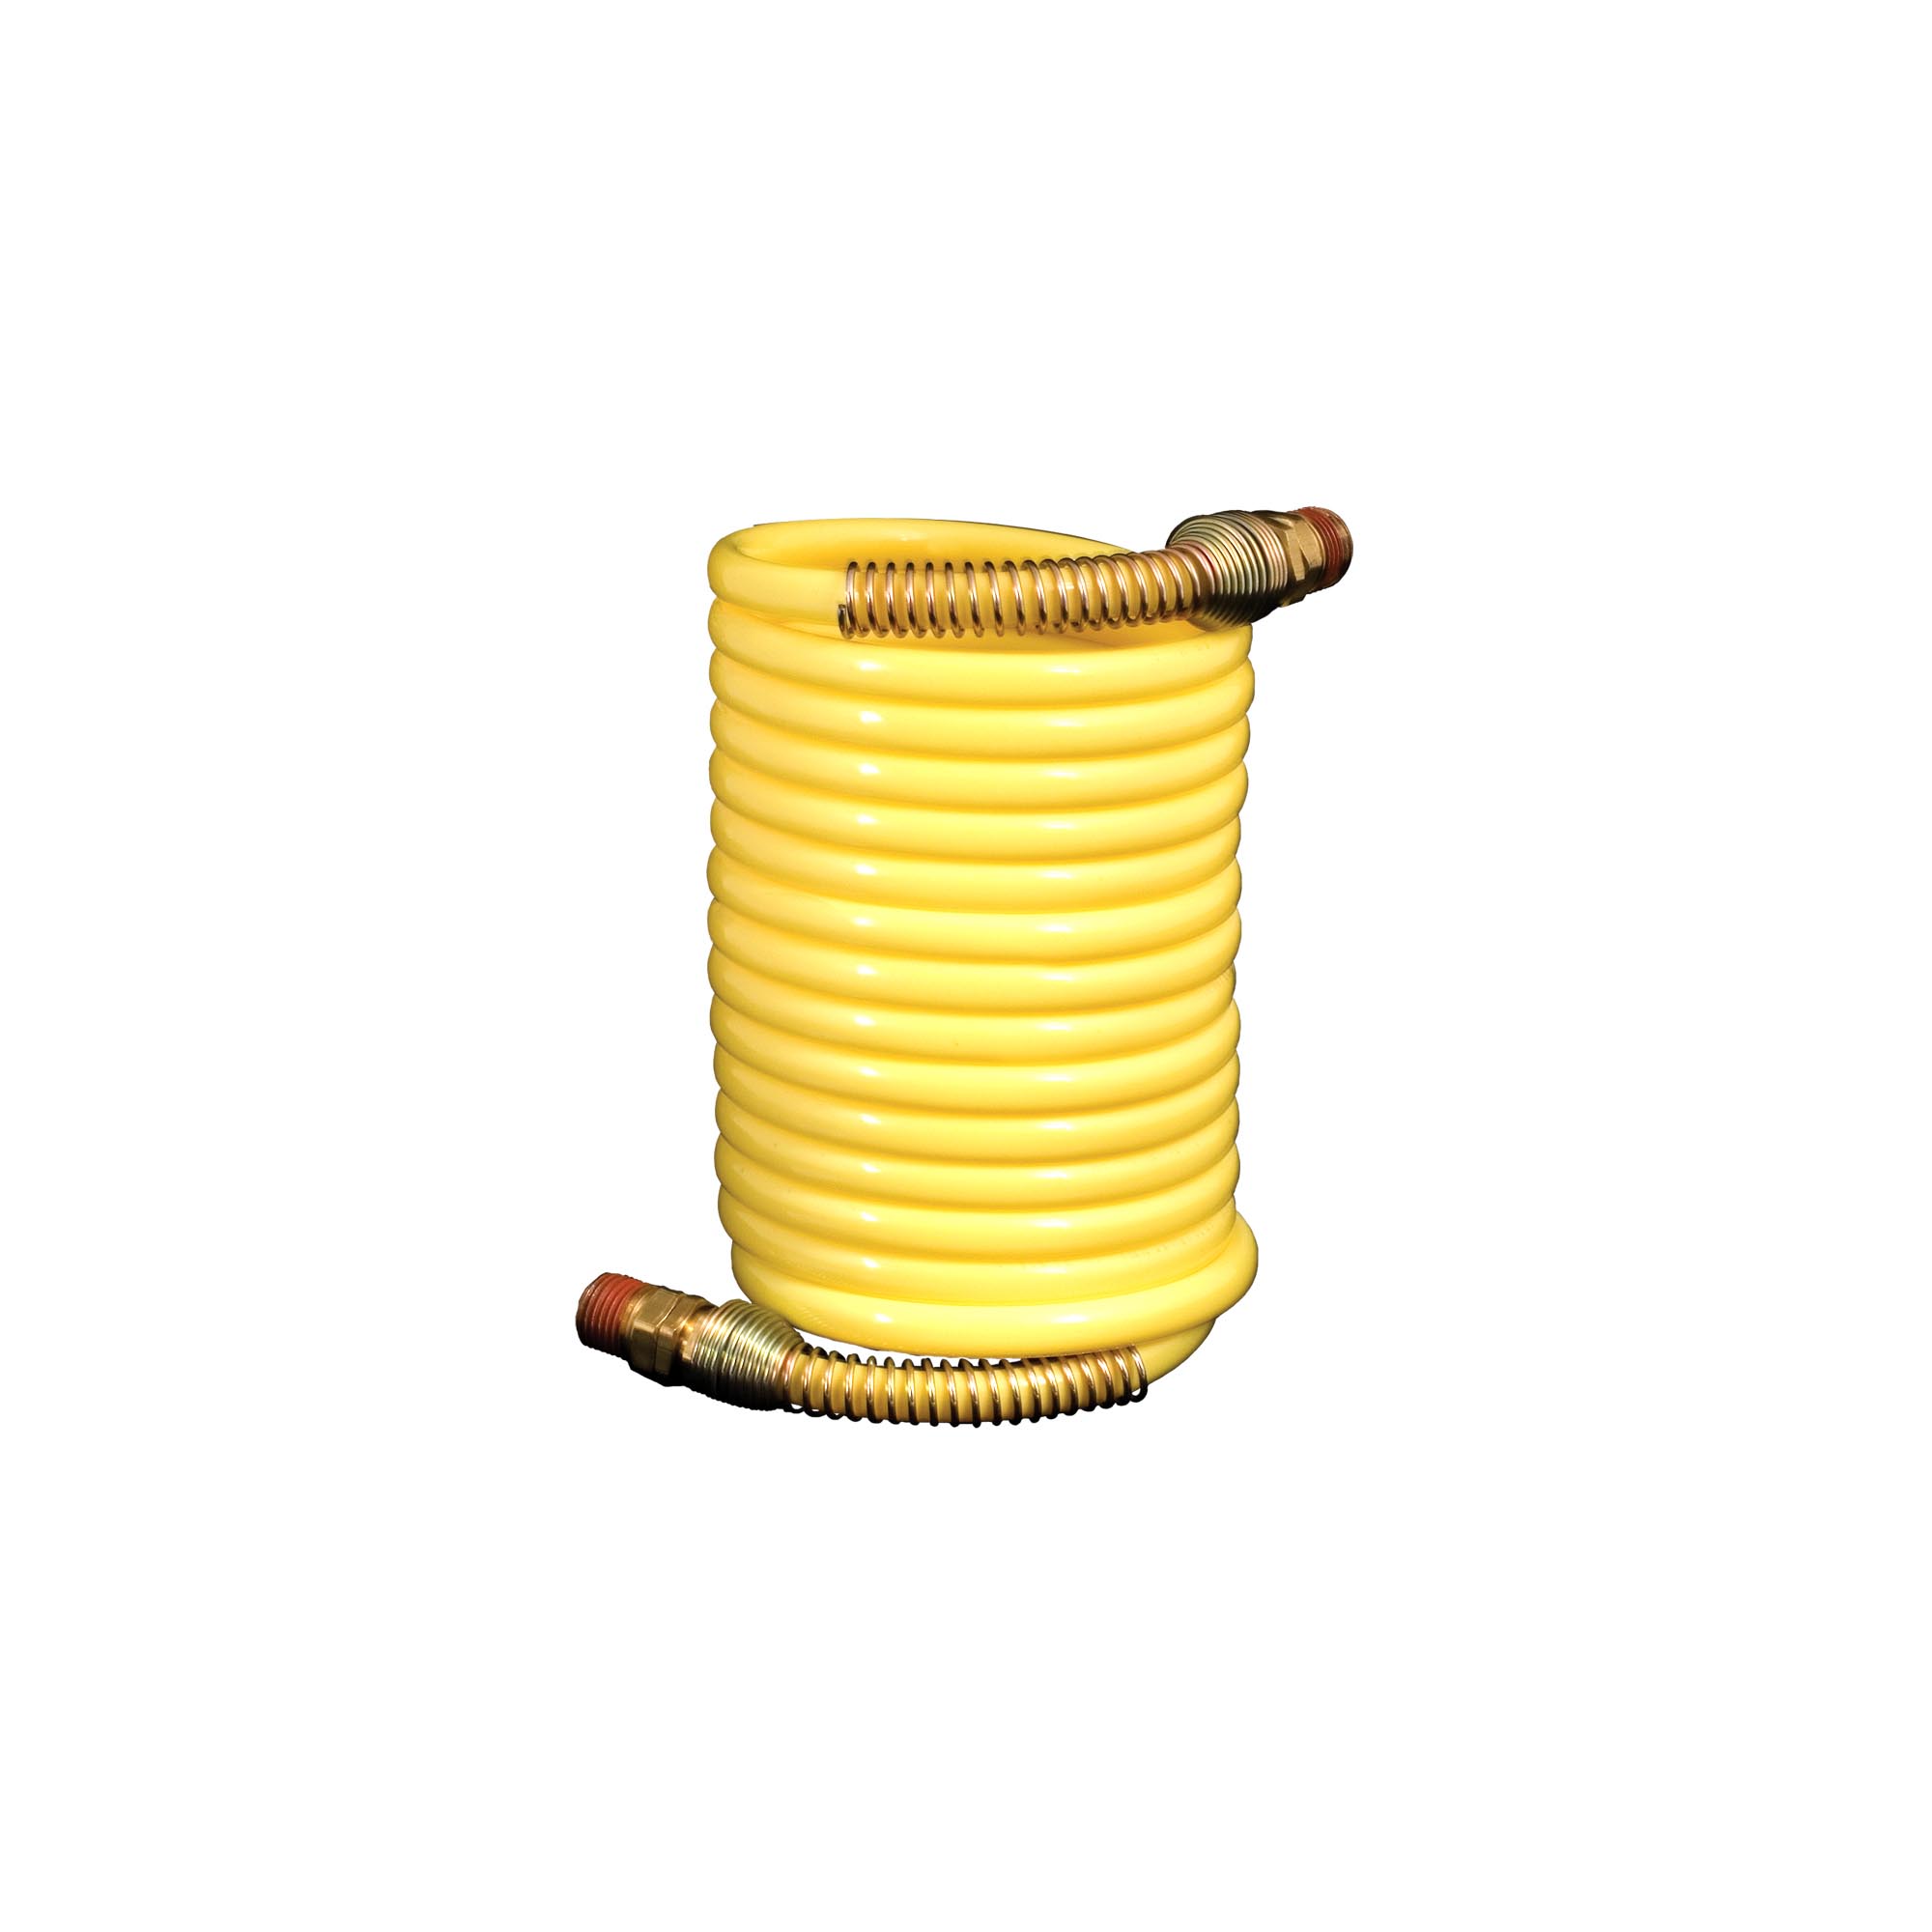 Model 900106 coiled compressed air hose.